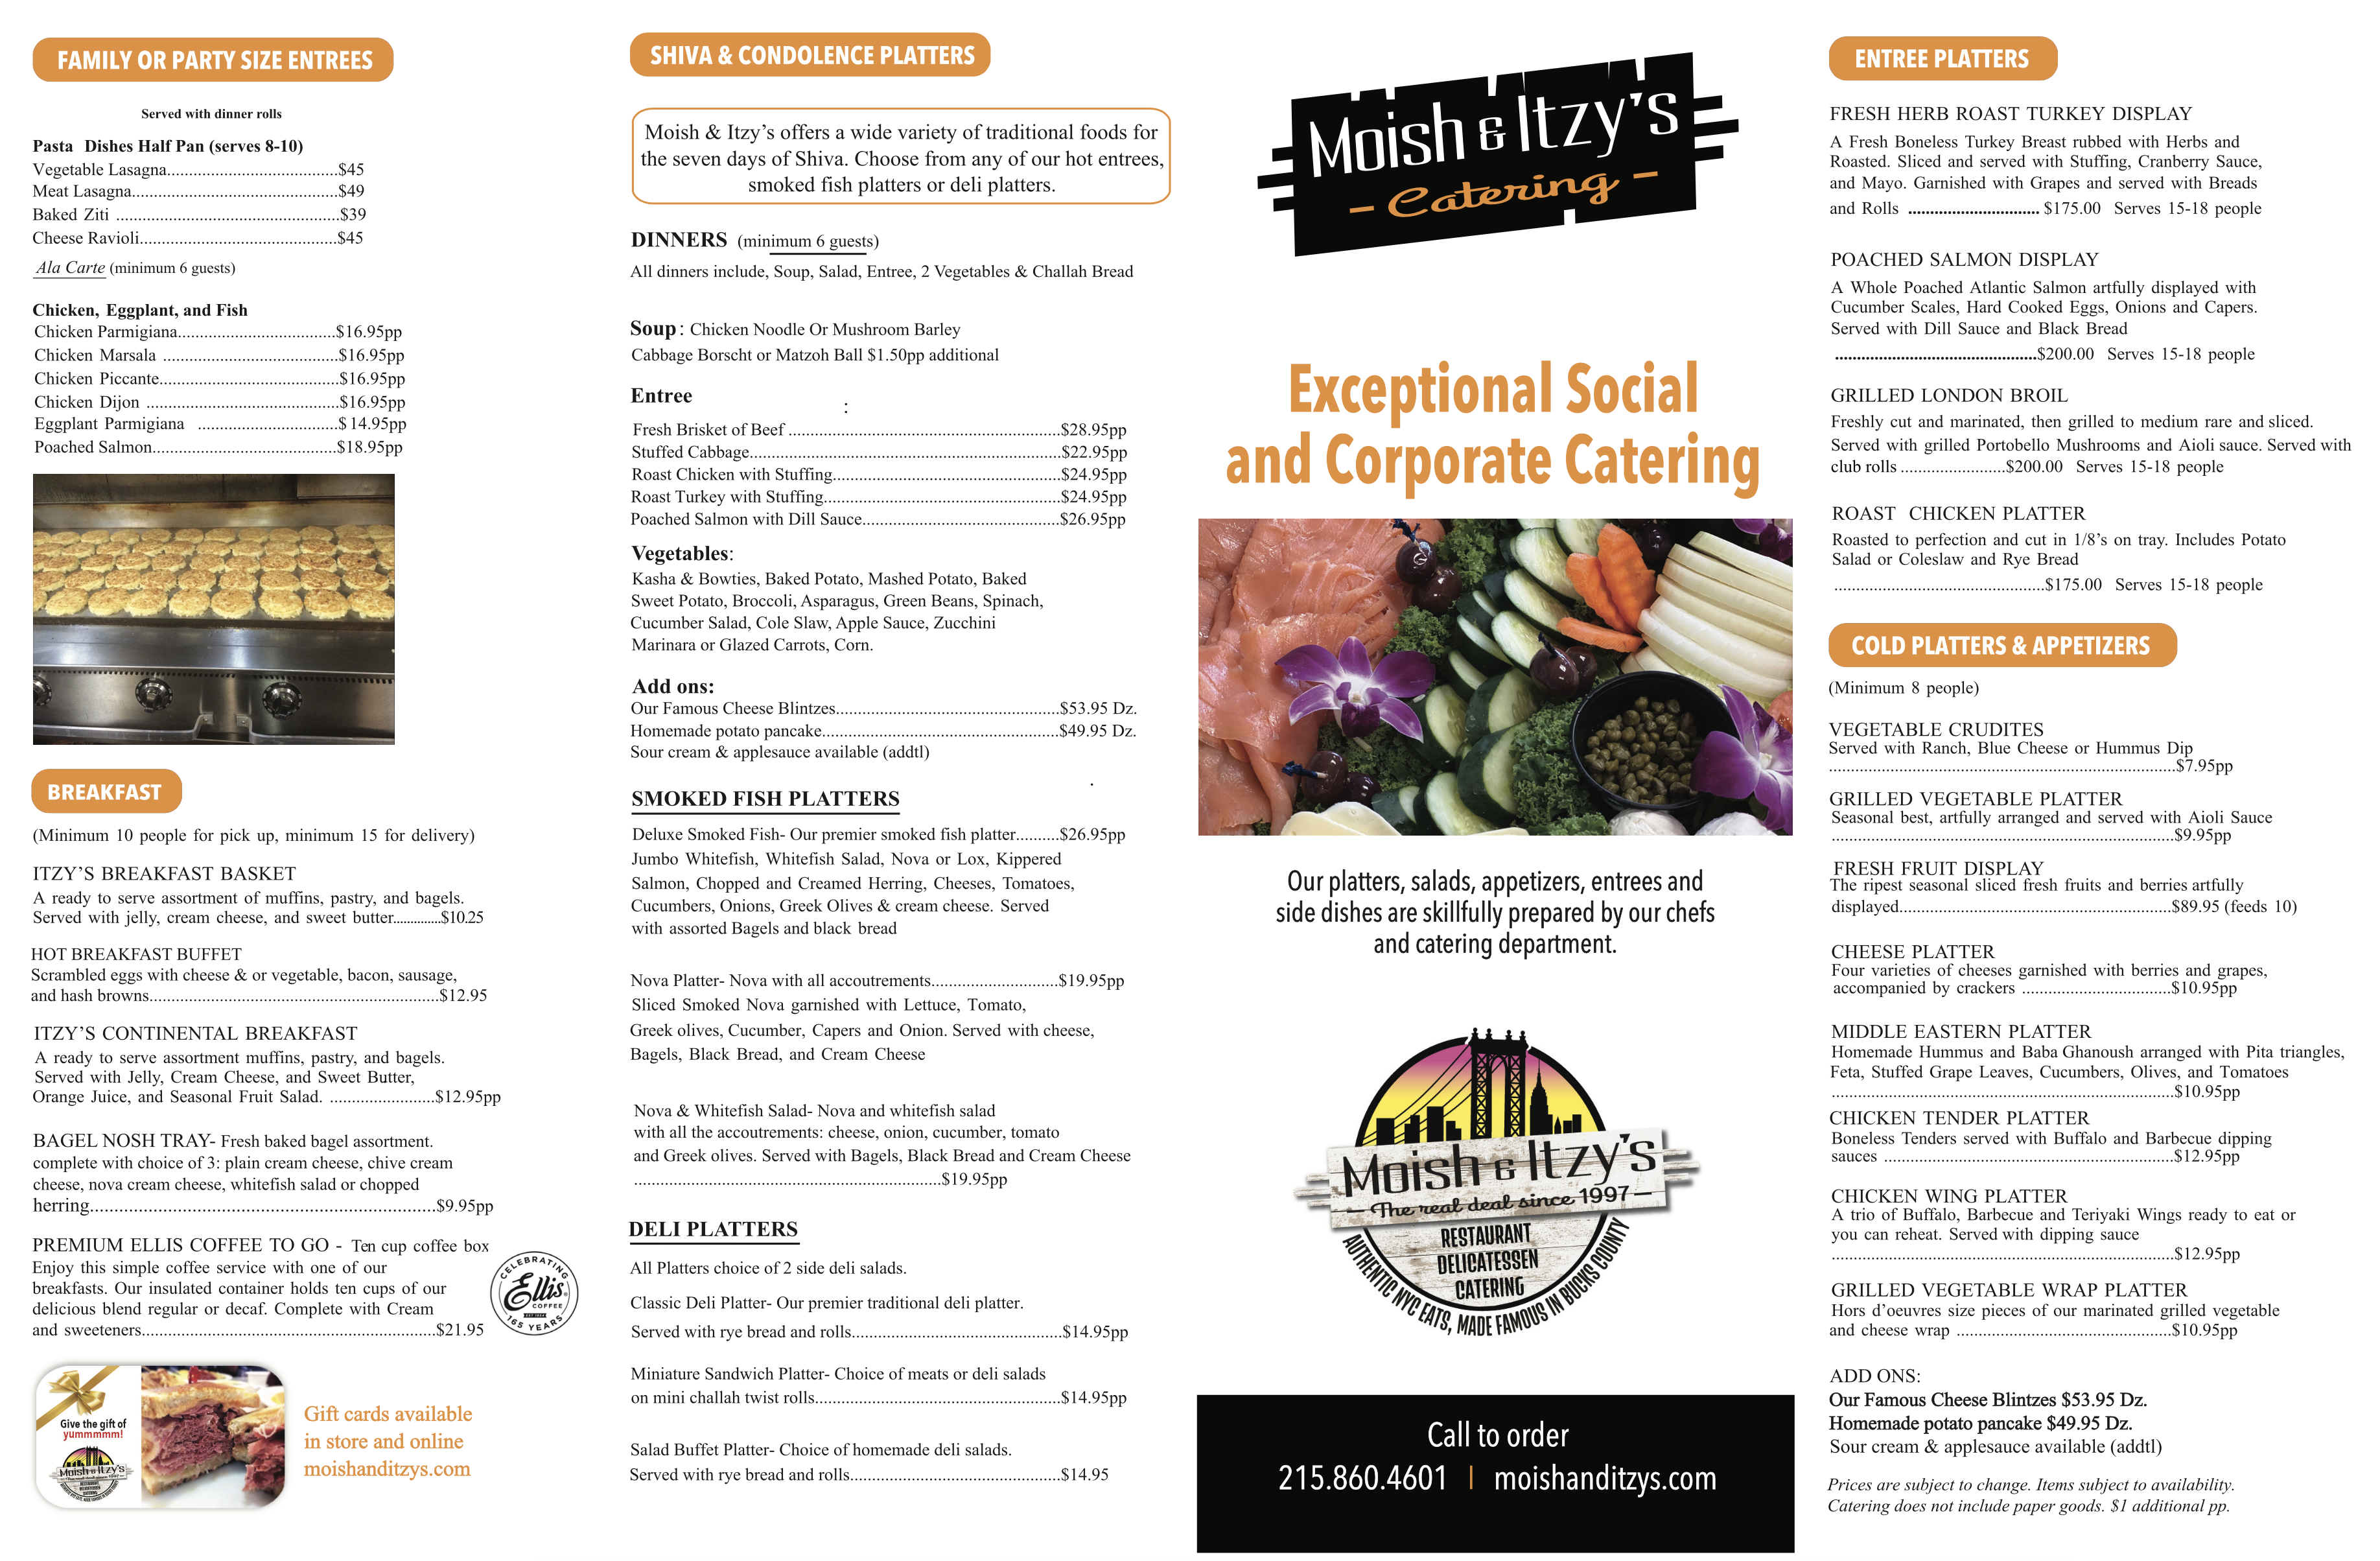 View Our Family Catering Menu